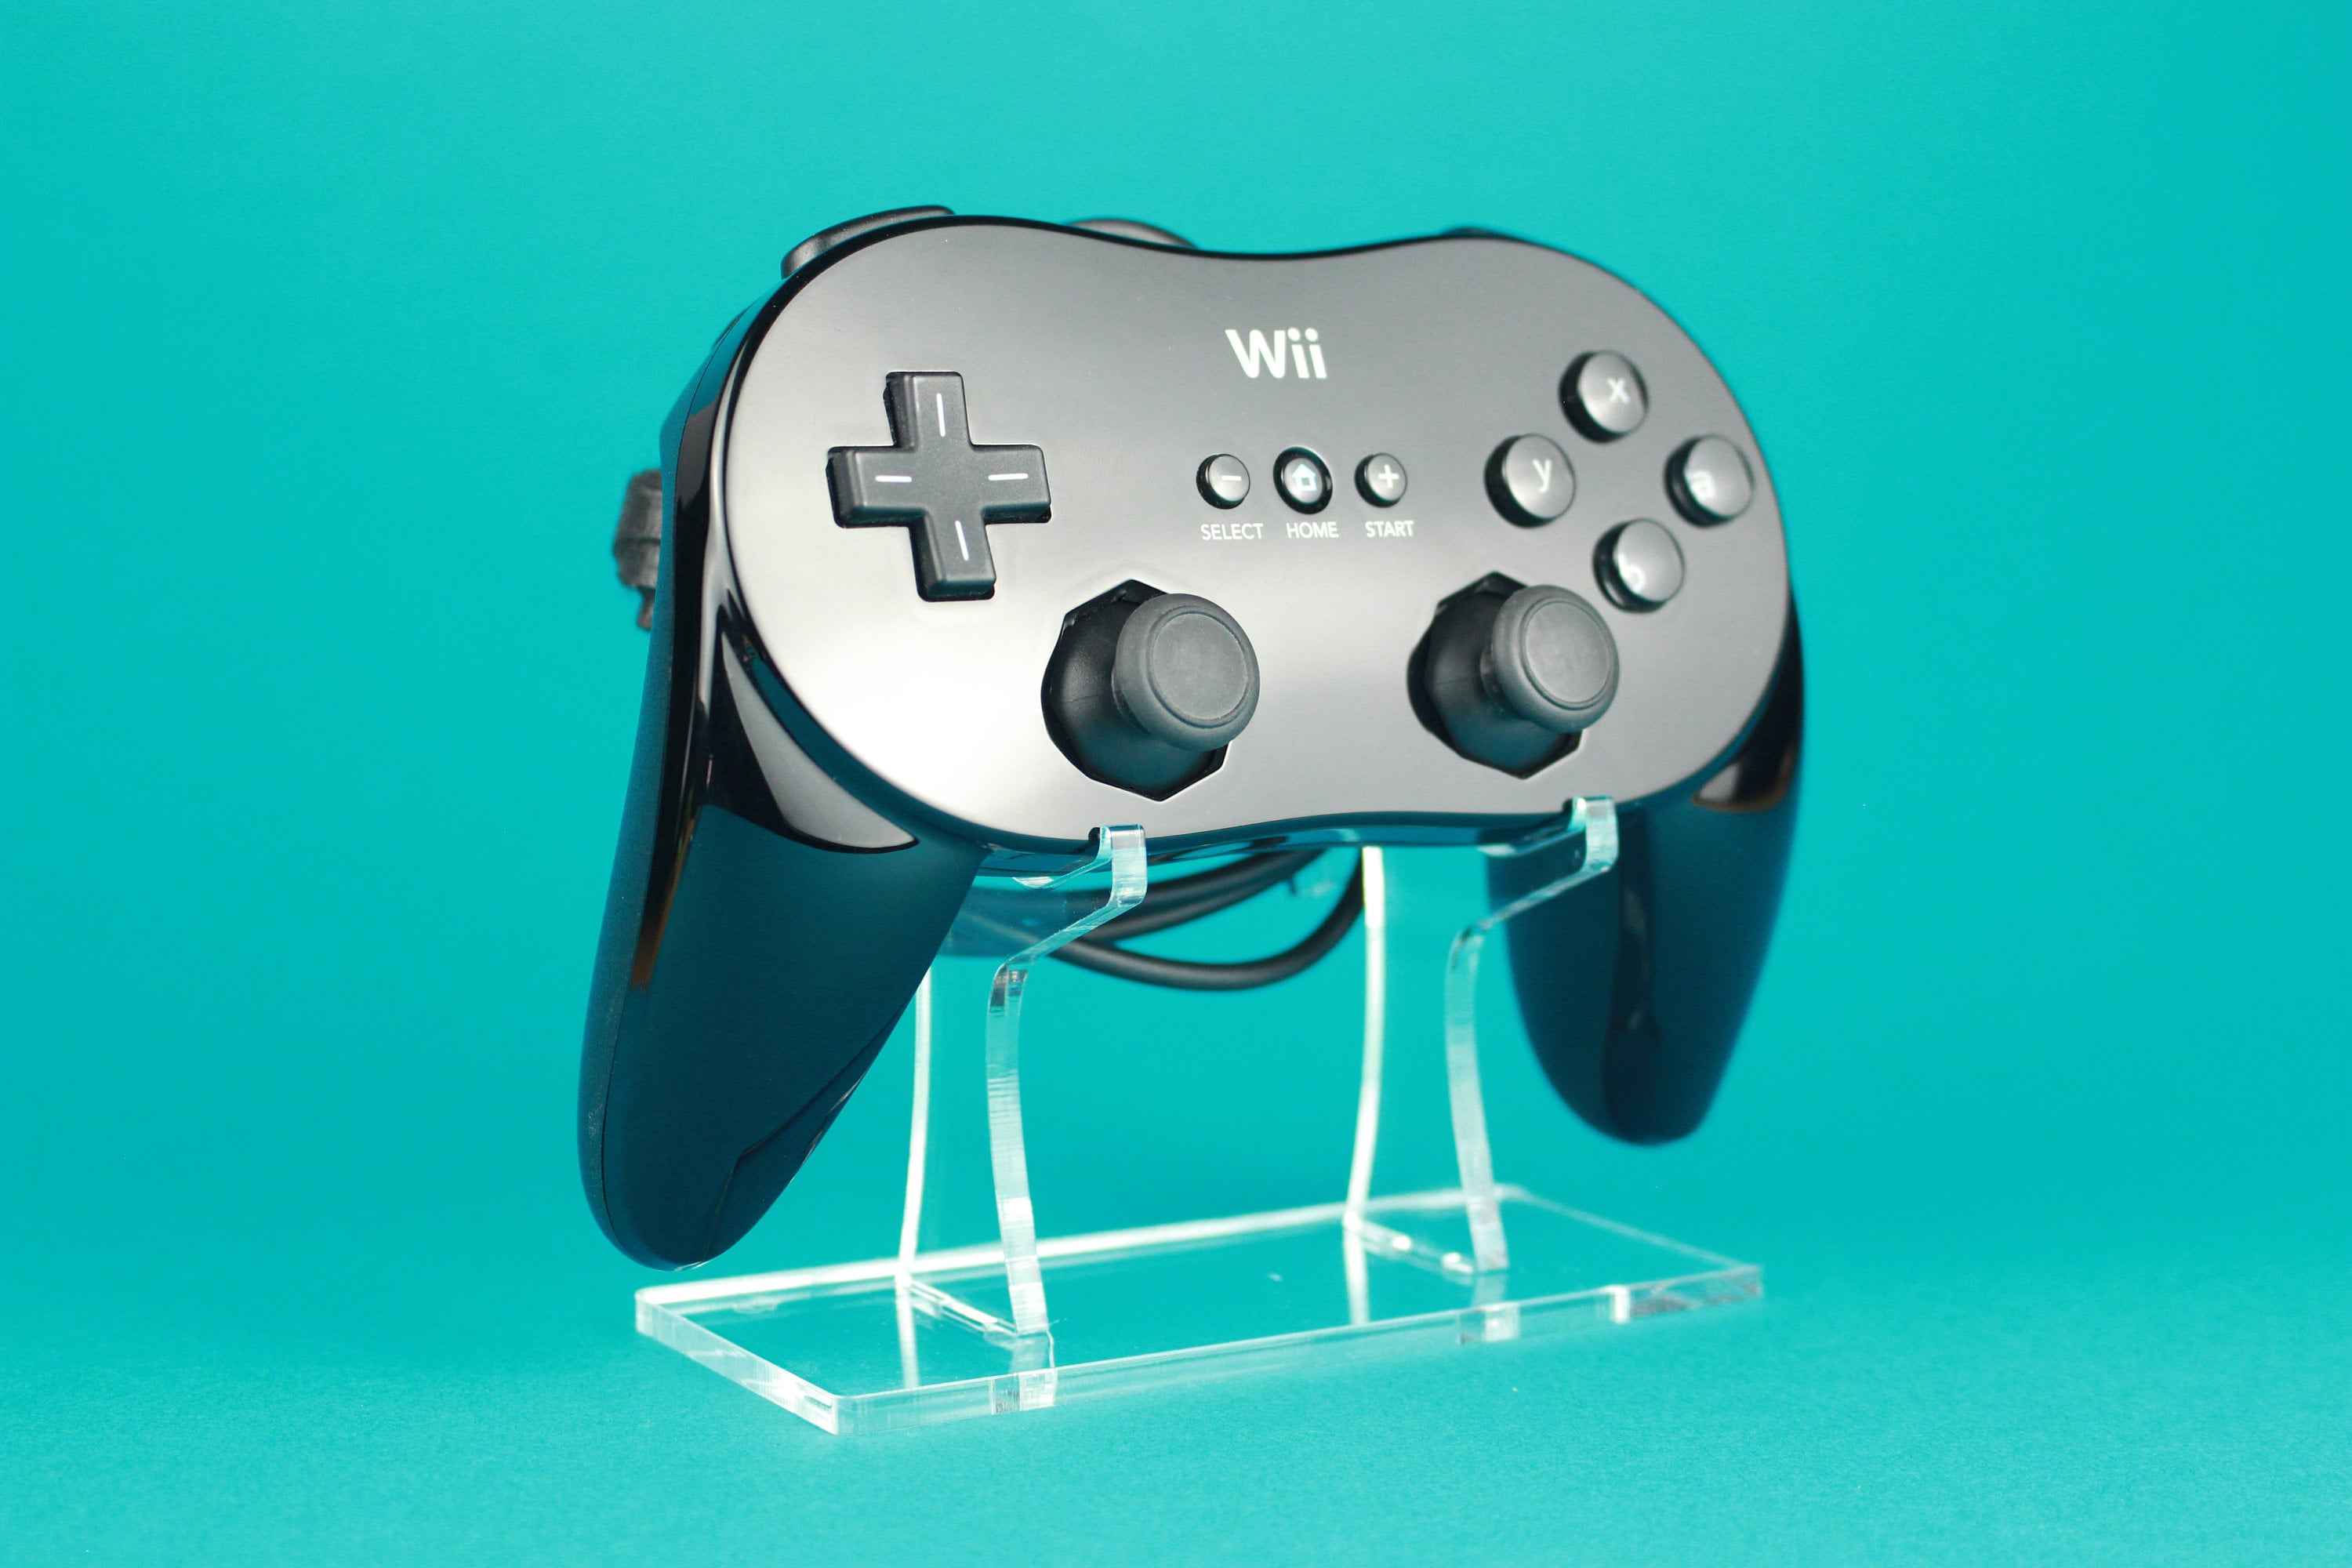 Acrylic Display Stand for Nintendo Wii Classic Pro Controller - Etsy